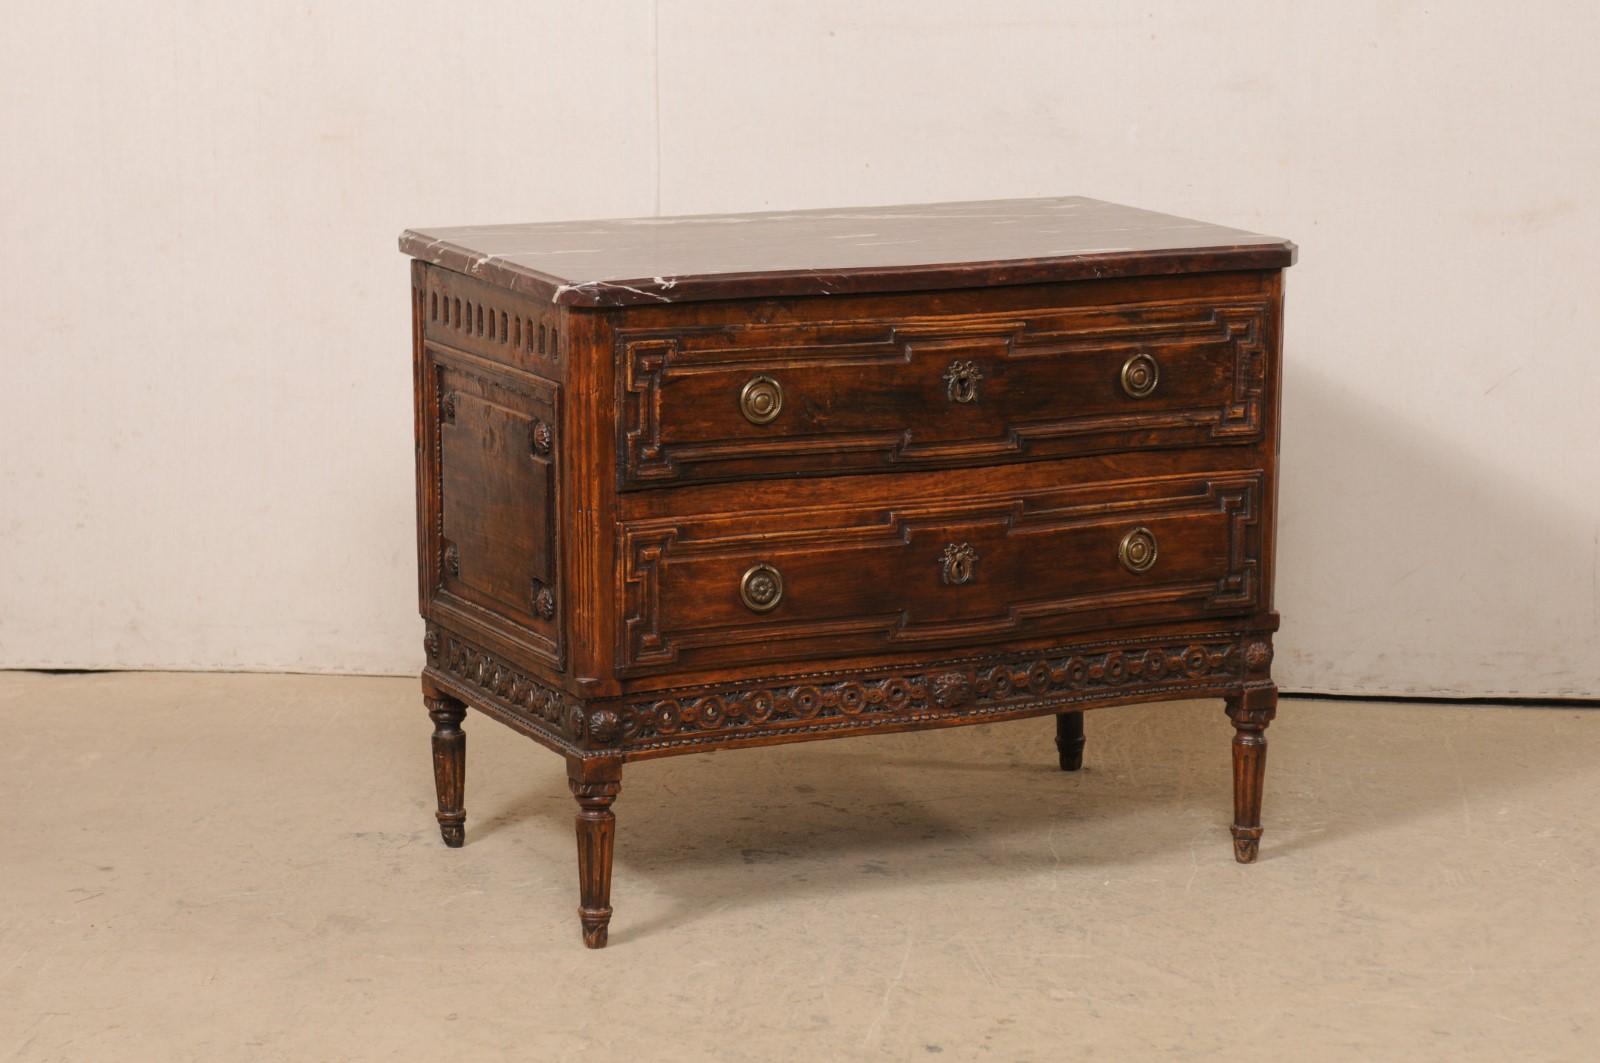 A French Neoclassic carved-wood chest of drawers with marble top from the early 19th century. This antique commode from France features a merlot marble top, resting upon a beautifully carved case, with subtle serpentine-shape, that houses a pair of